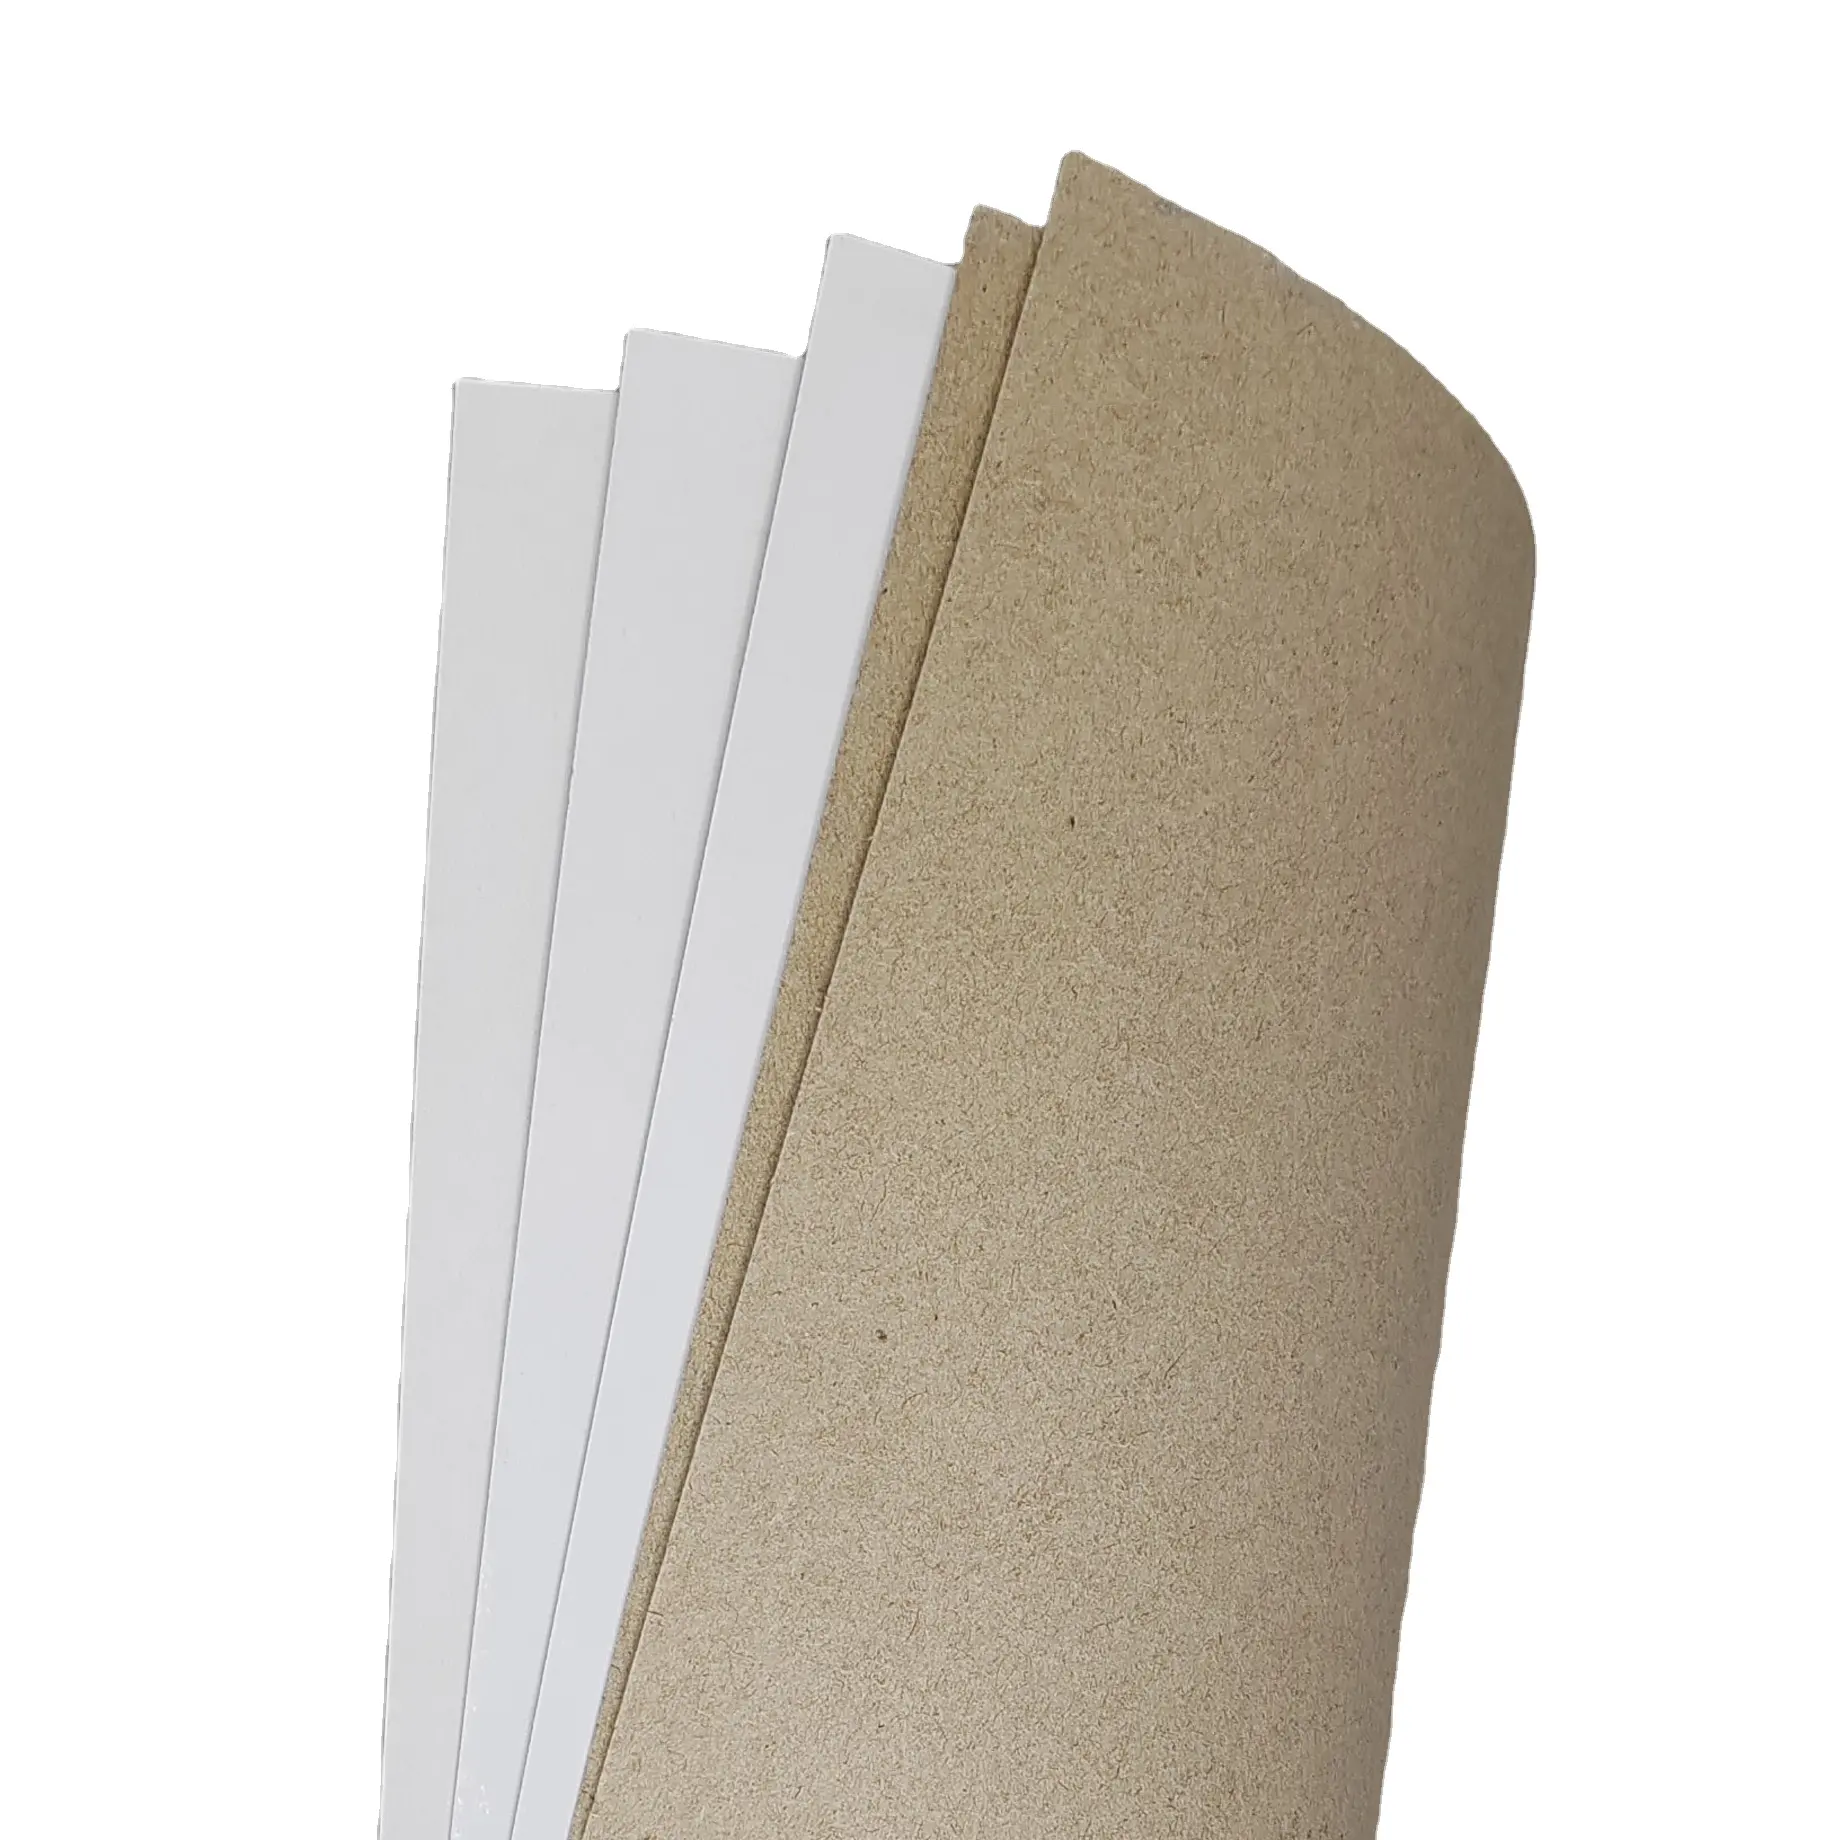 Paper Mill 450gsm Well Clay One Side Coated Duplex Board for Packing Packaging Offset Printing Wood Pulp Recycled Roll or Sheet